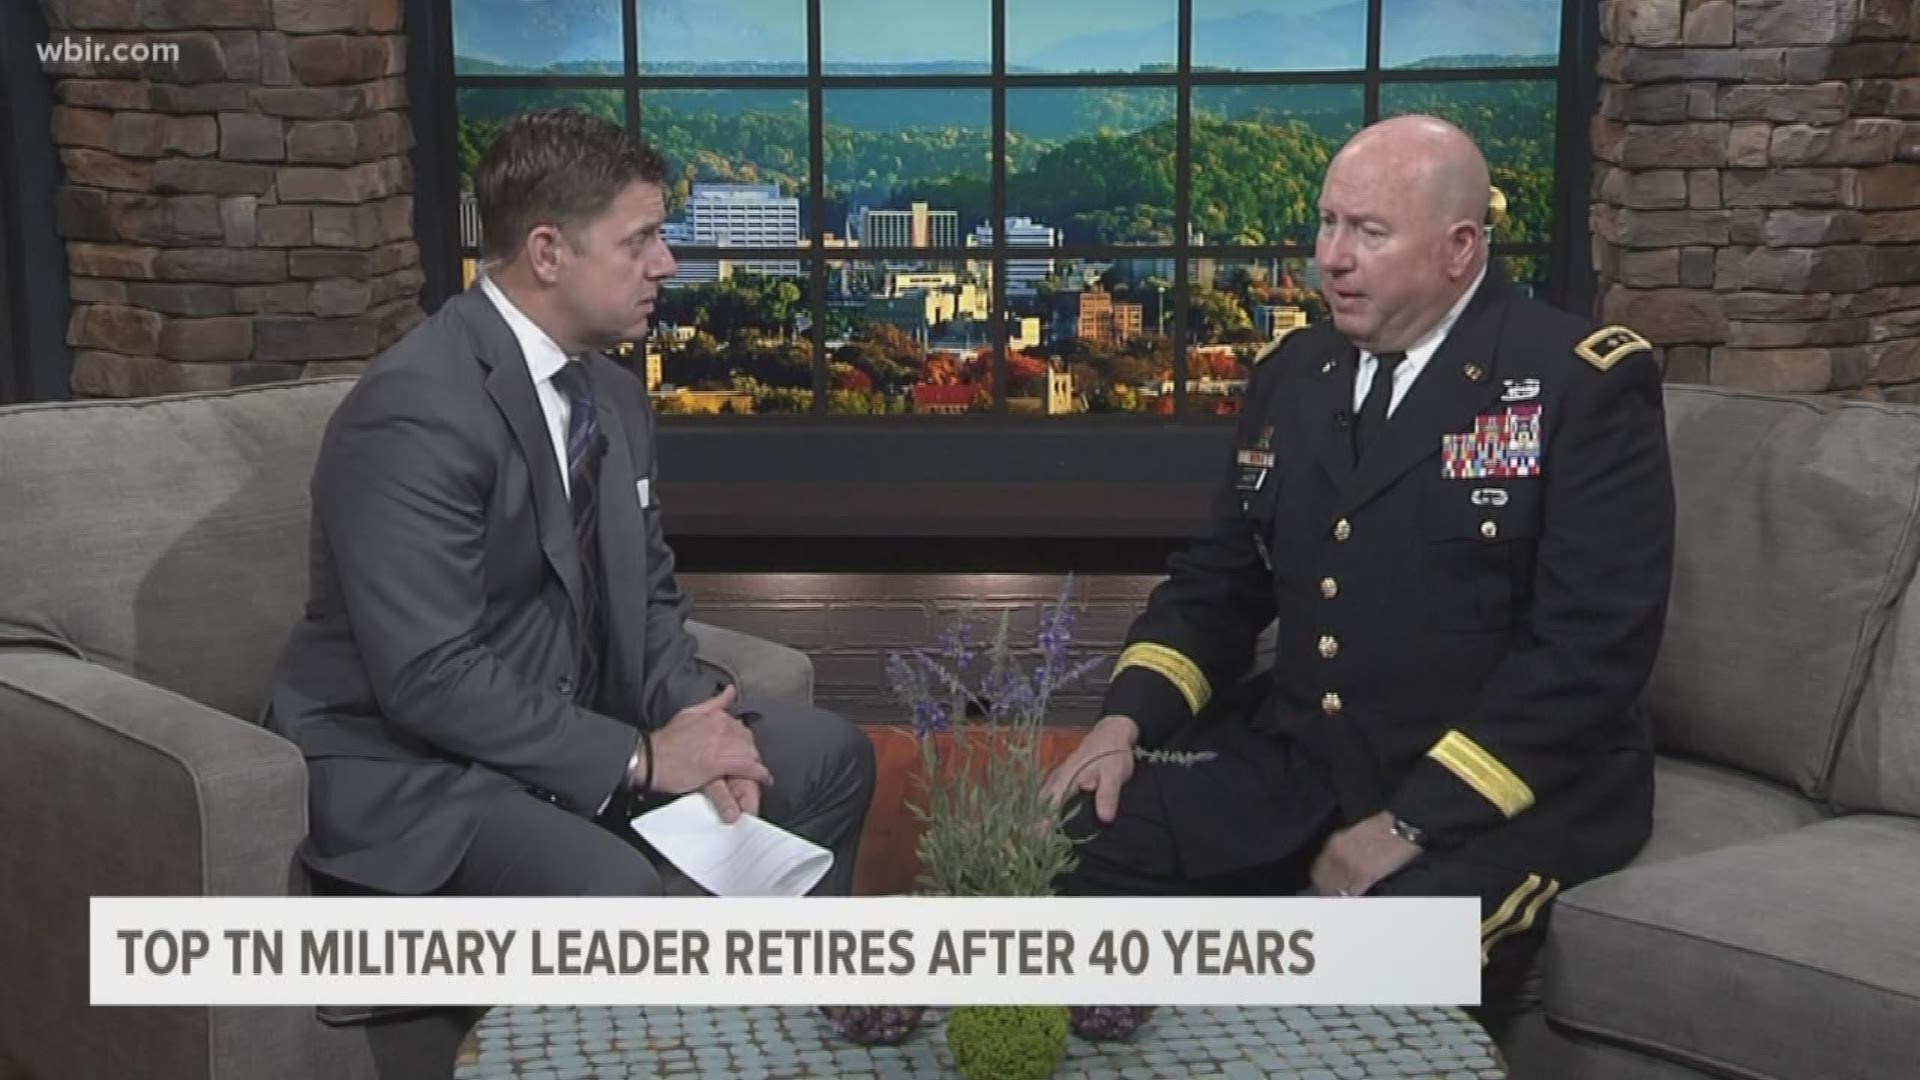 Maj.-Gen. Haston has had an amazing 40 year career in the U.S. military, the last nine years in the state's highest post commanding the Tennessee National Guard.